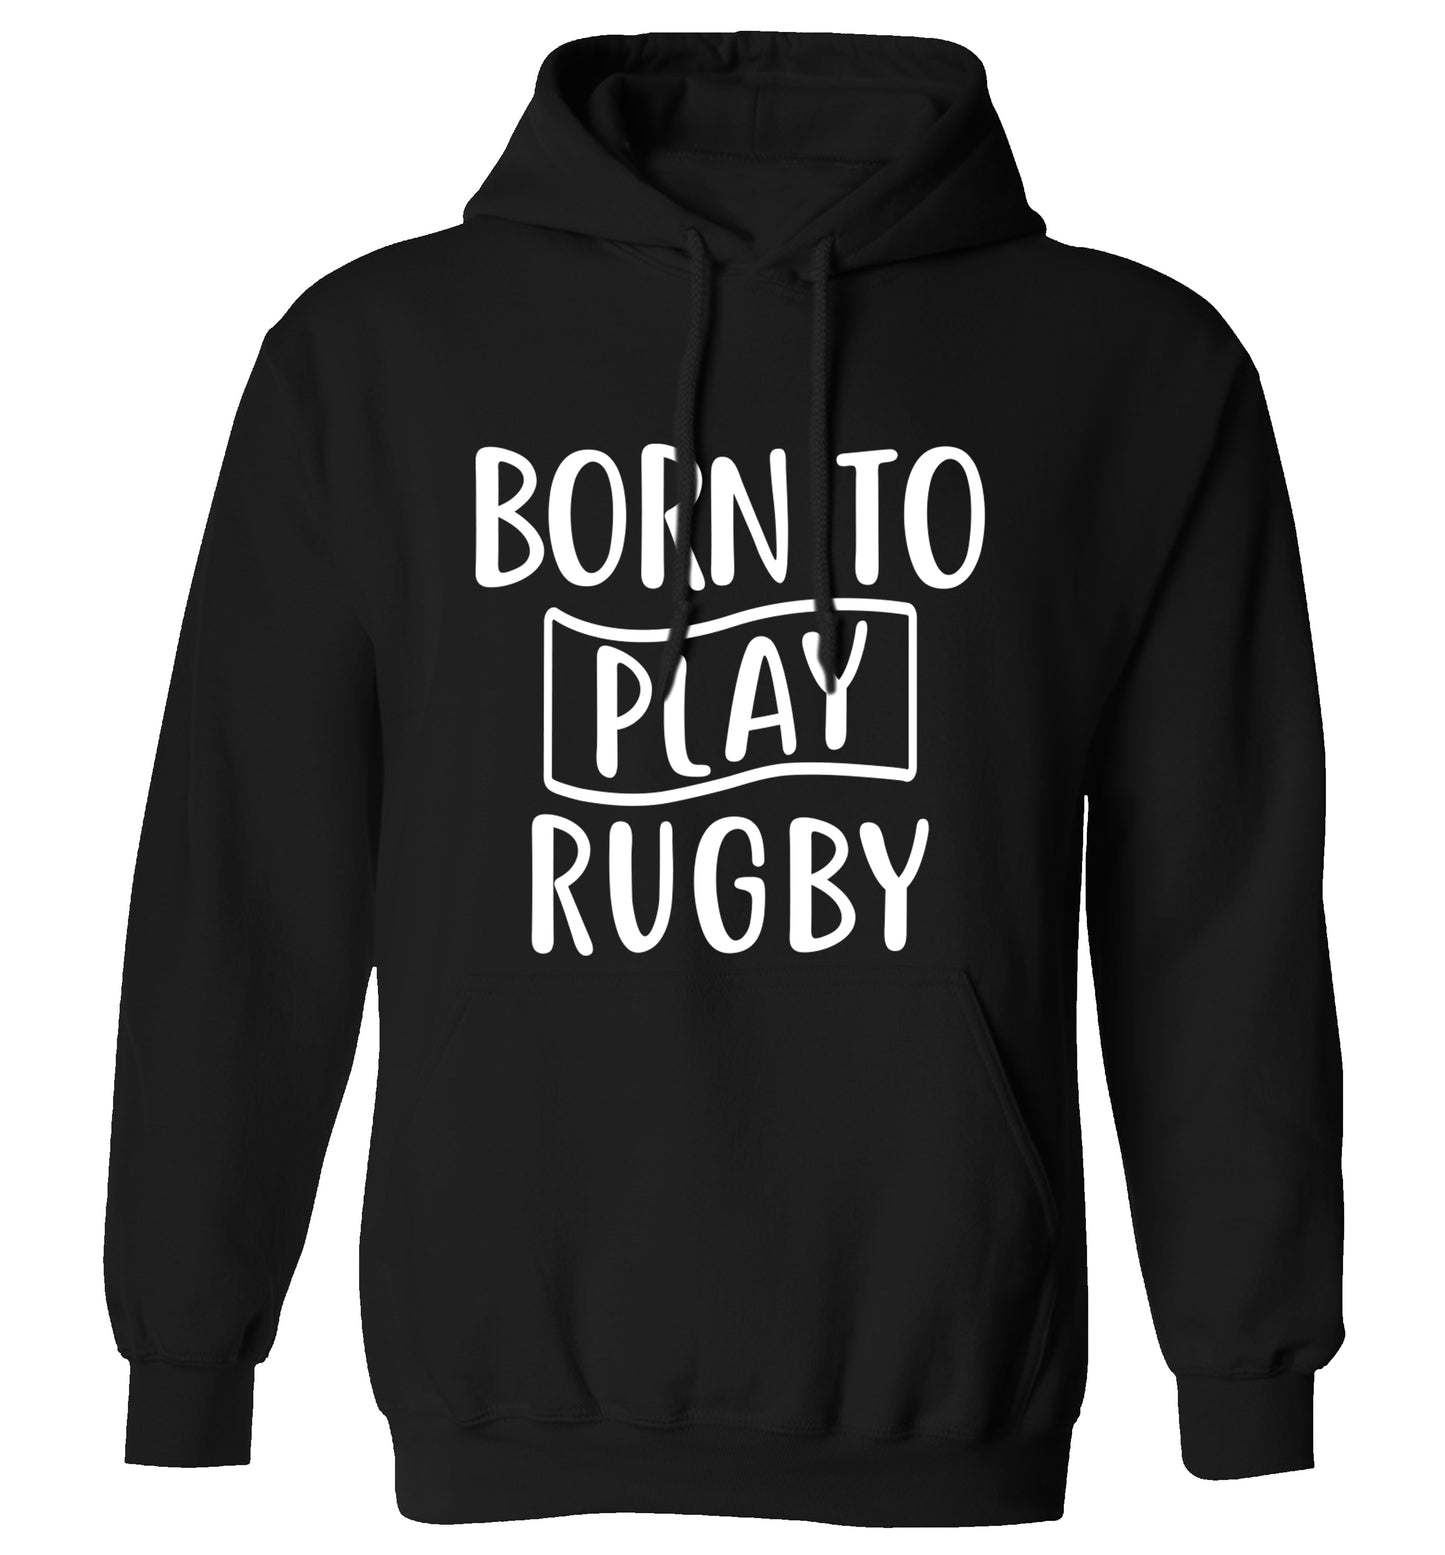 Born to play rugby adults unisex black hoodie 2XL